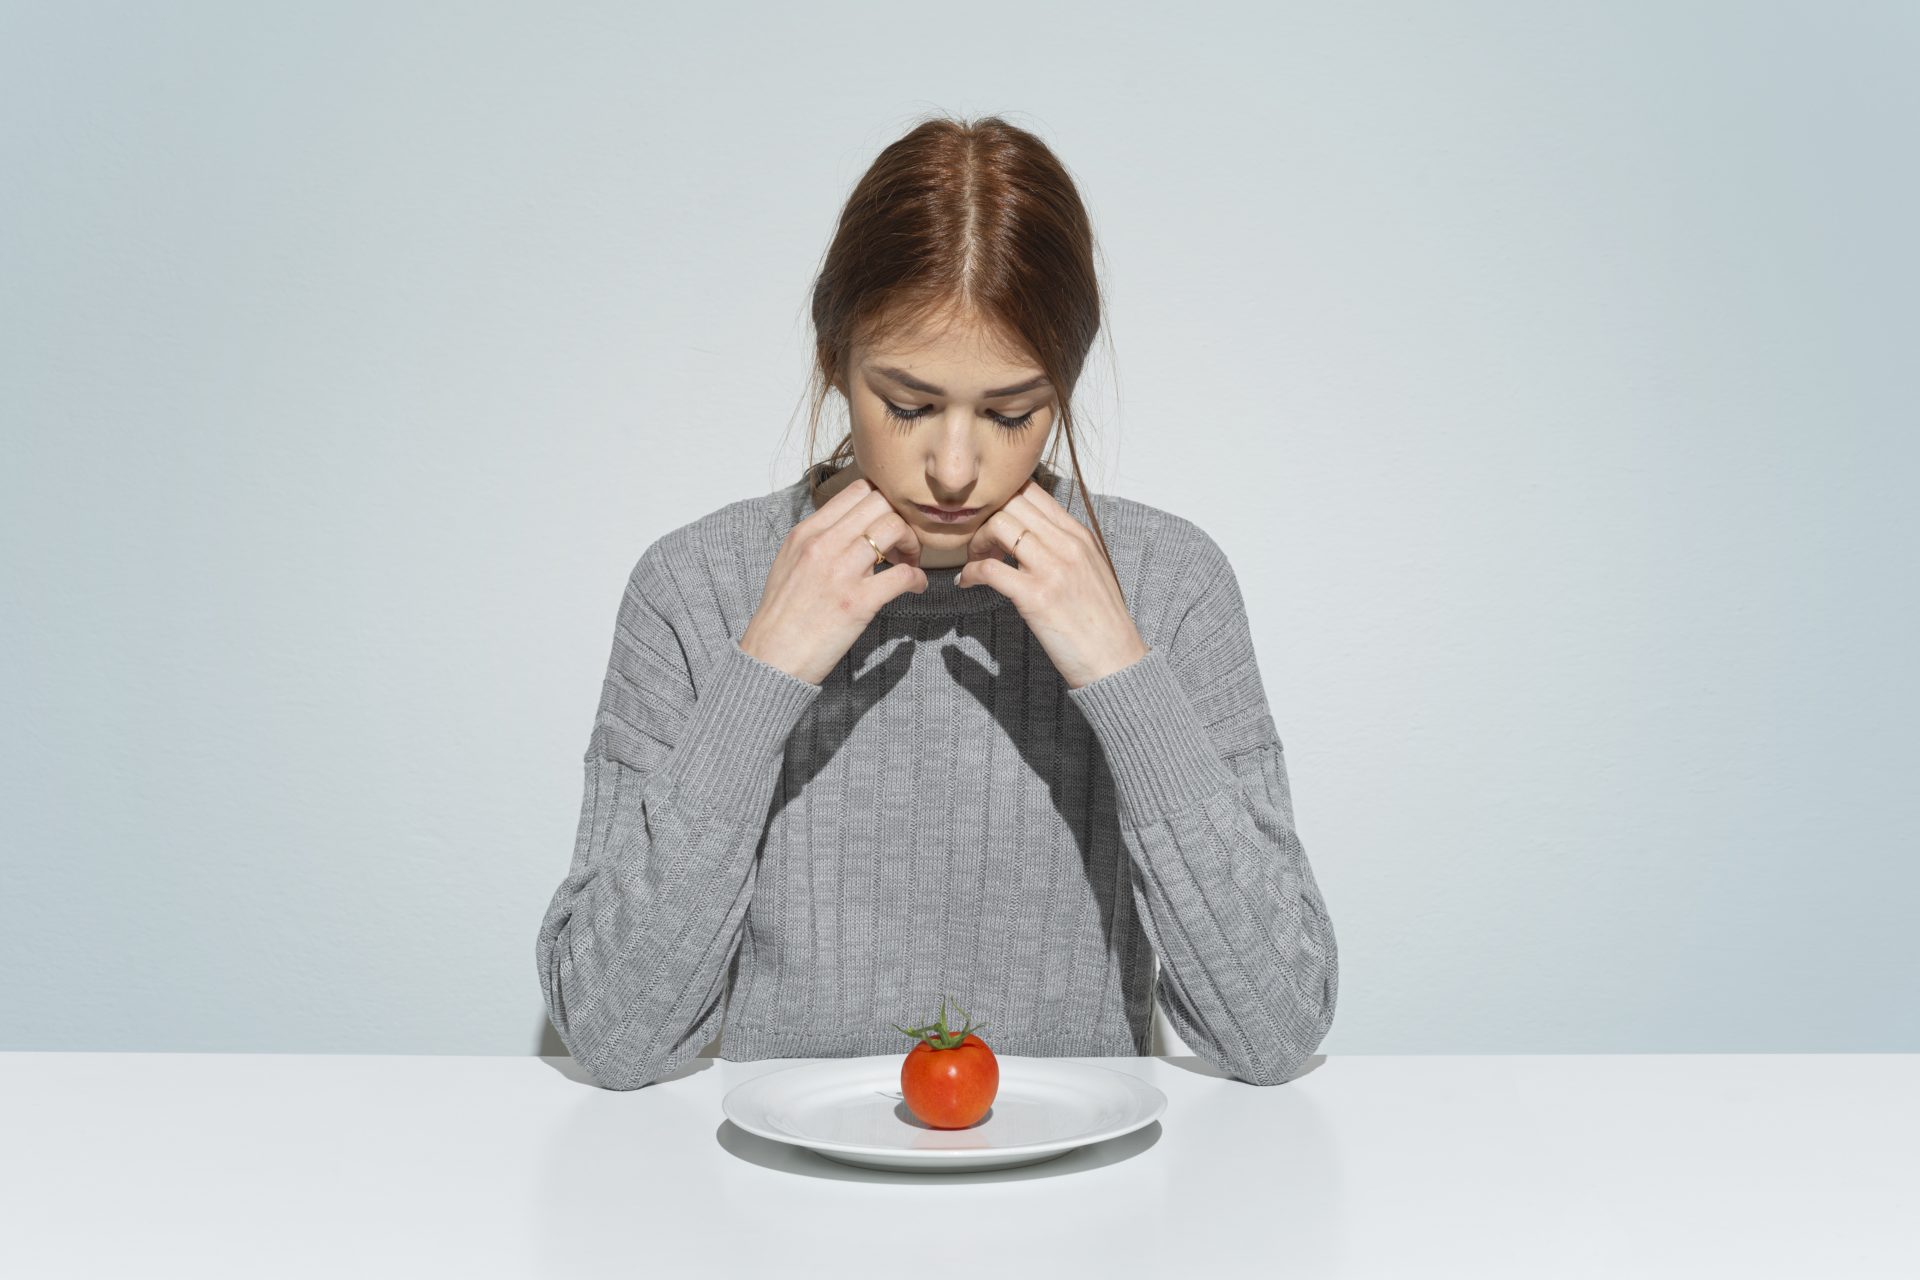 The relationship between veganism and anorexia